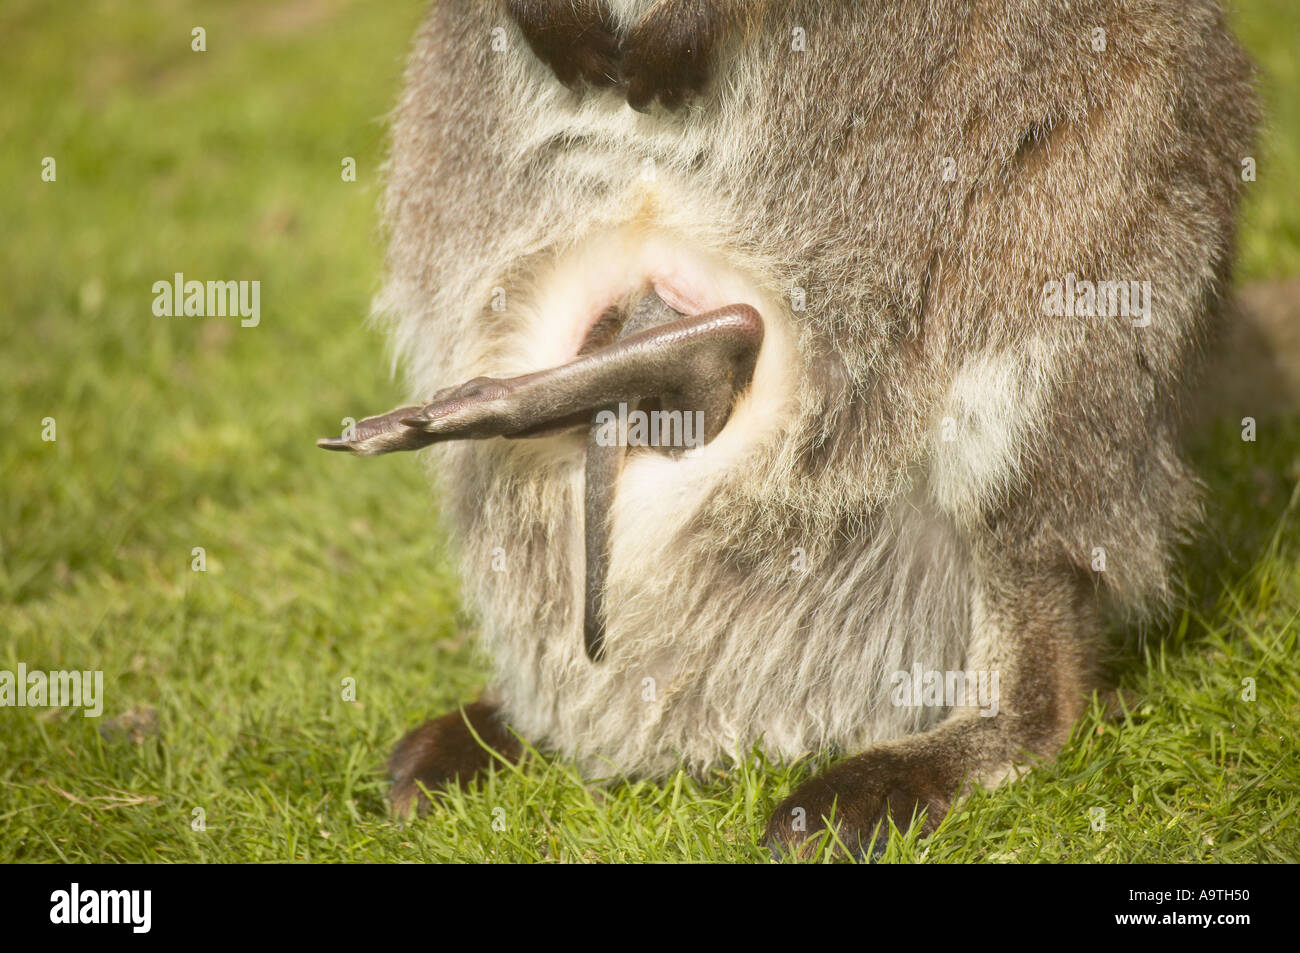 Young Joey diving headfirst into mothers pouch with its back legs sticking out. Bennett's Wallaby (Macropus rufogriseus) Stock Photo